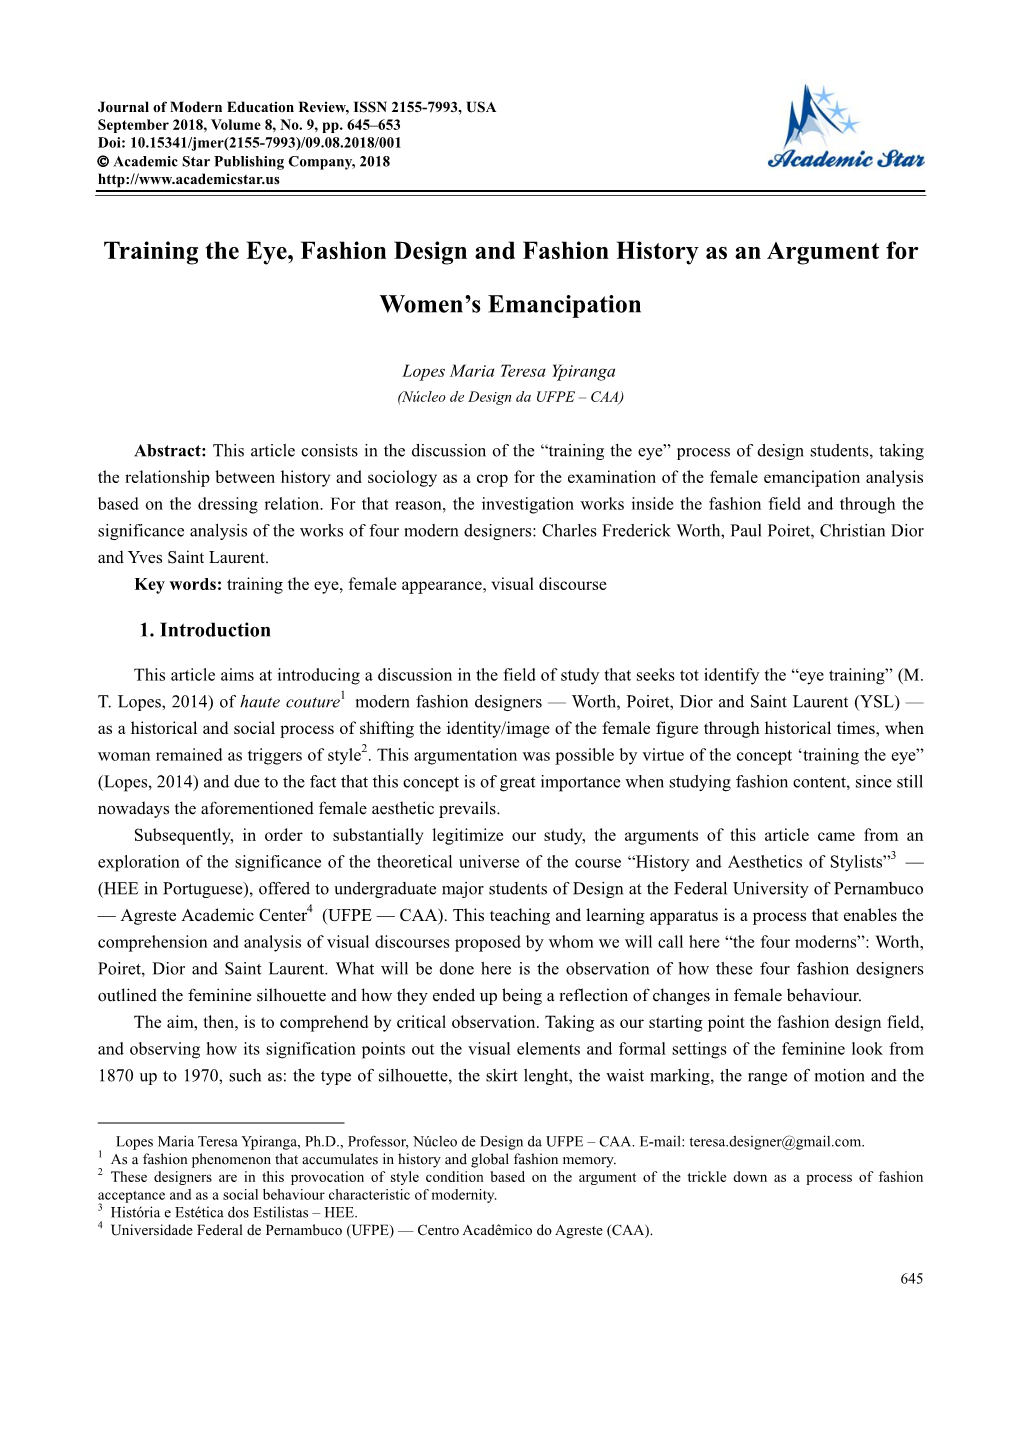 Training the Eye, Fashion Design and Fashion History As an Argument For